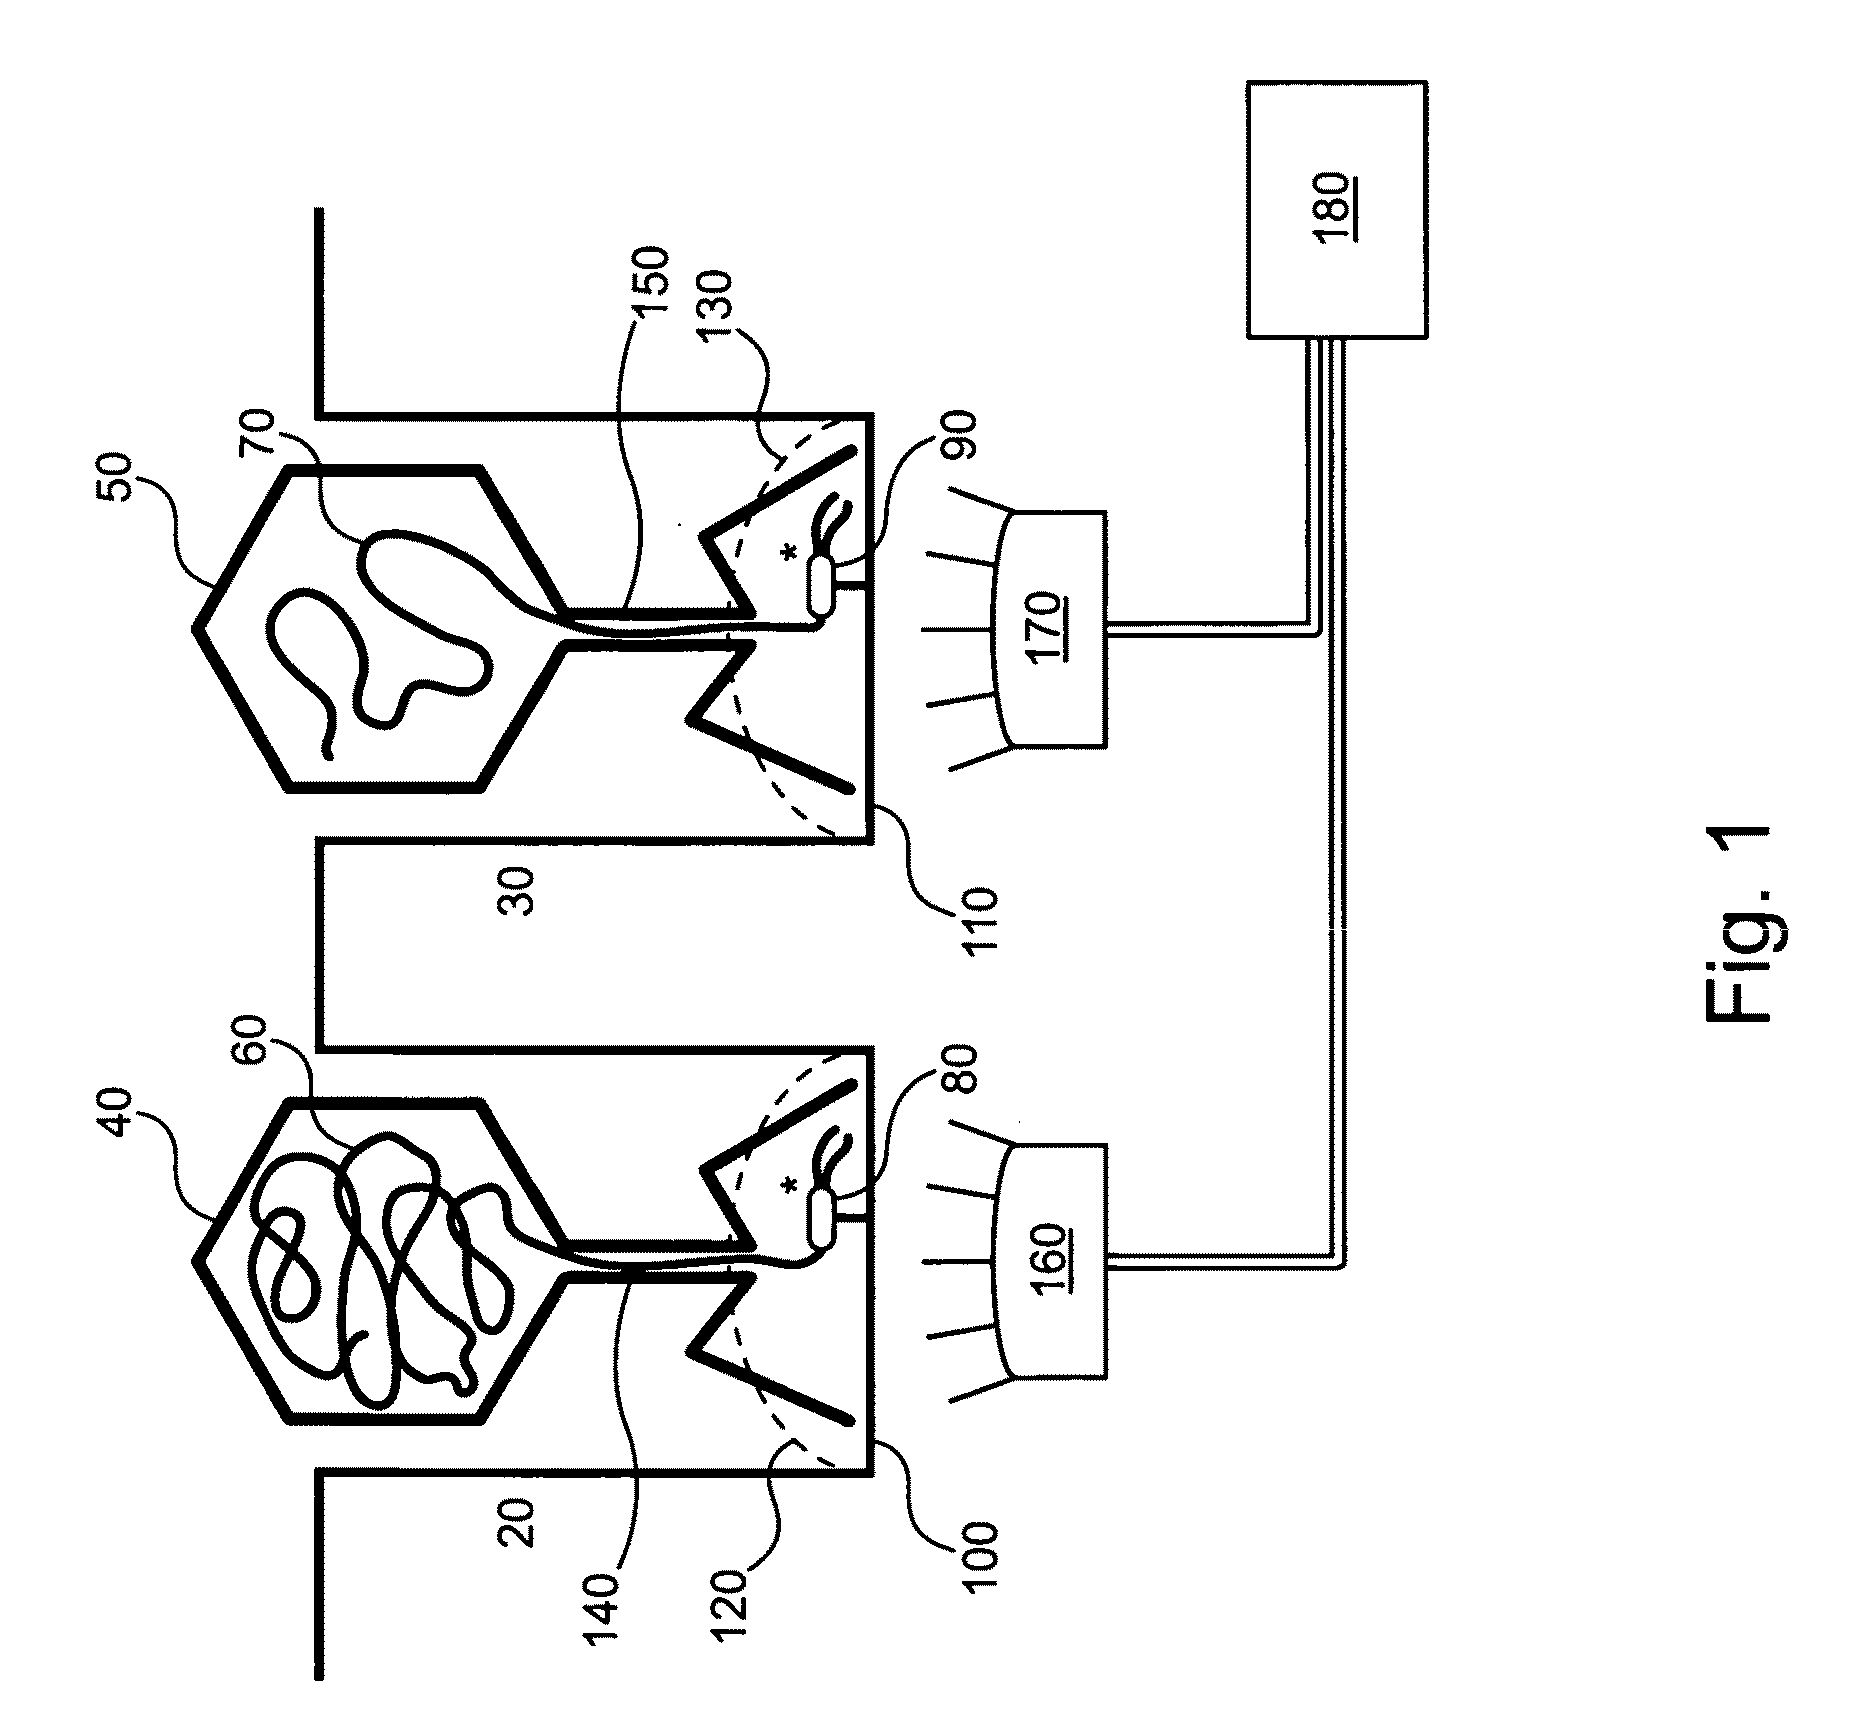 Single molecule loading methods and compositions